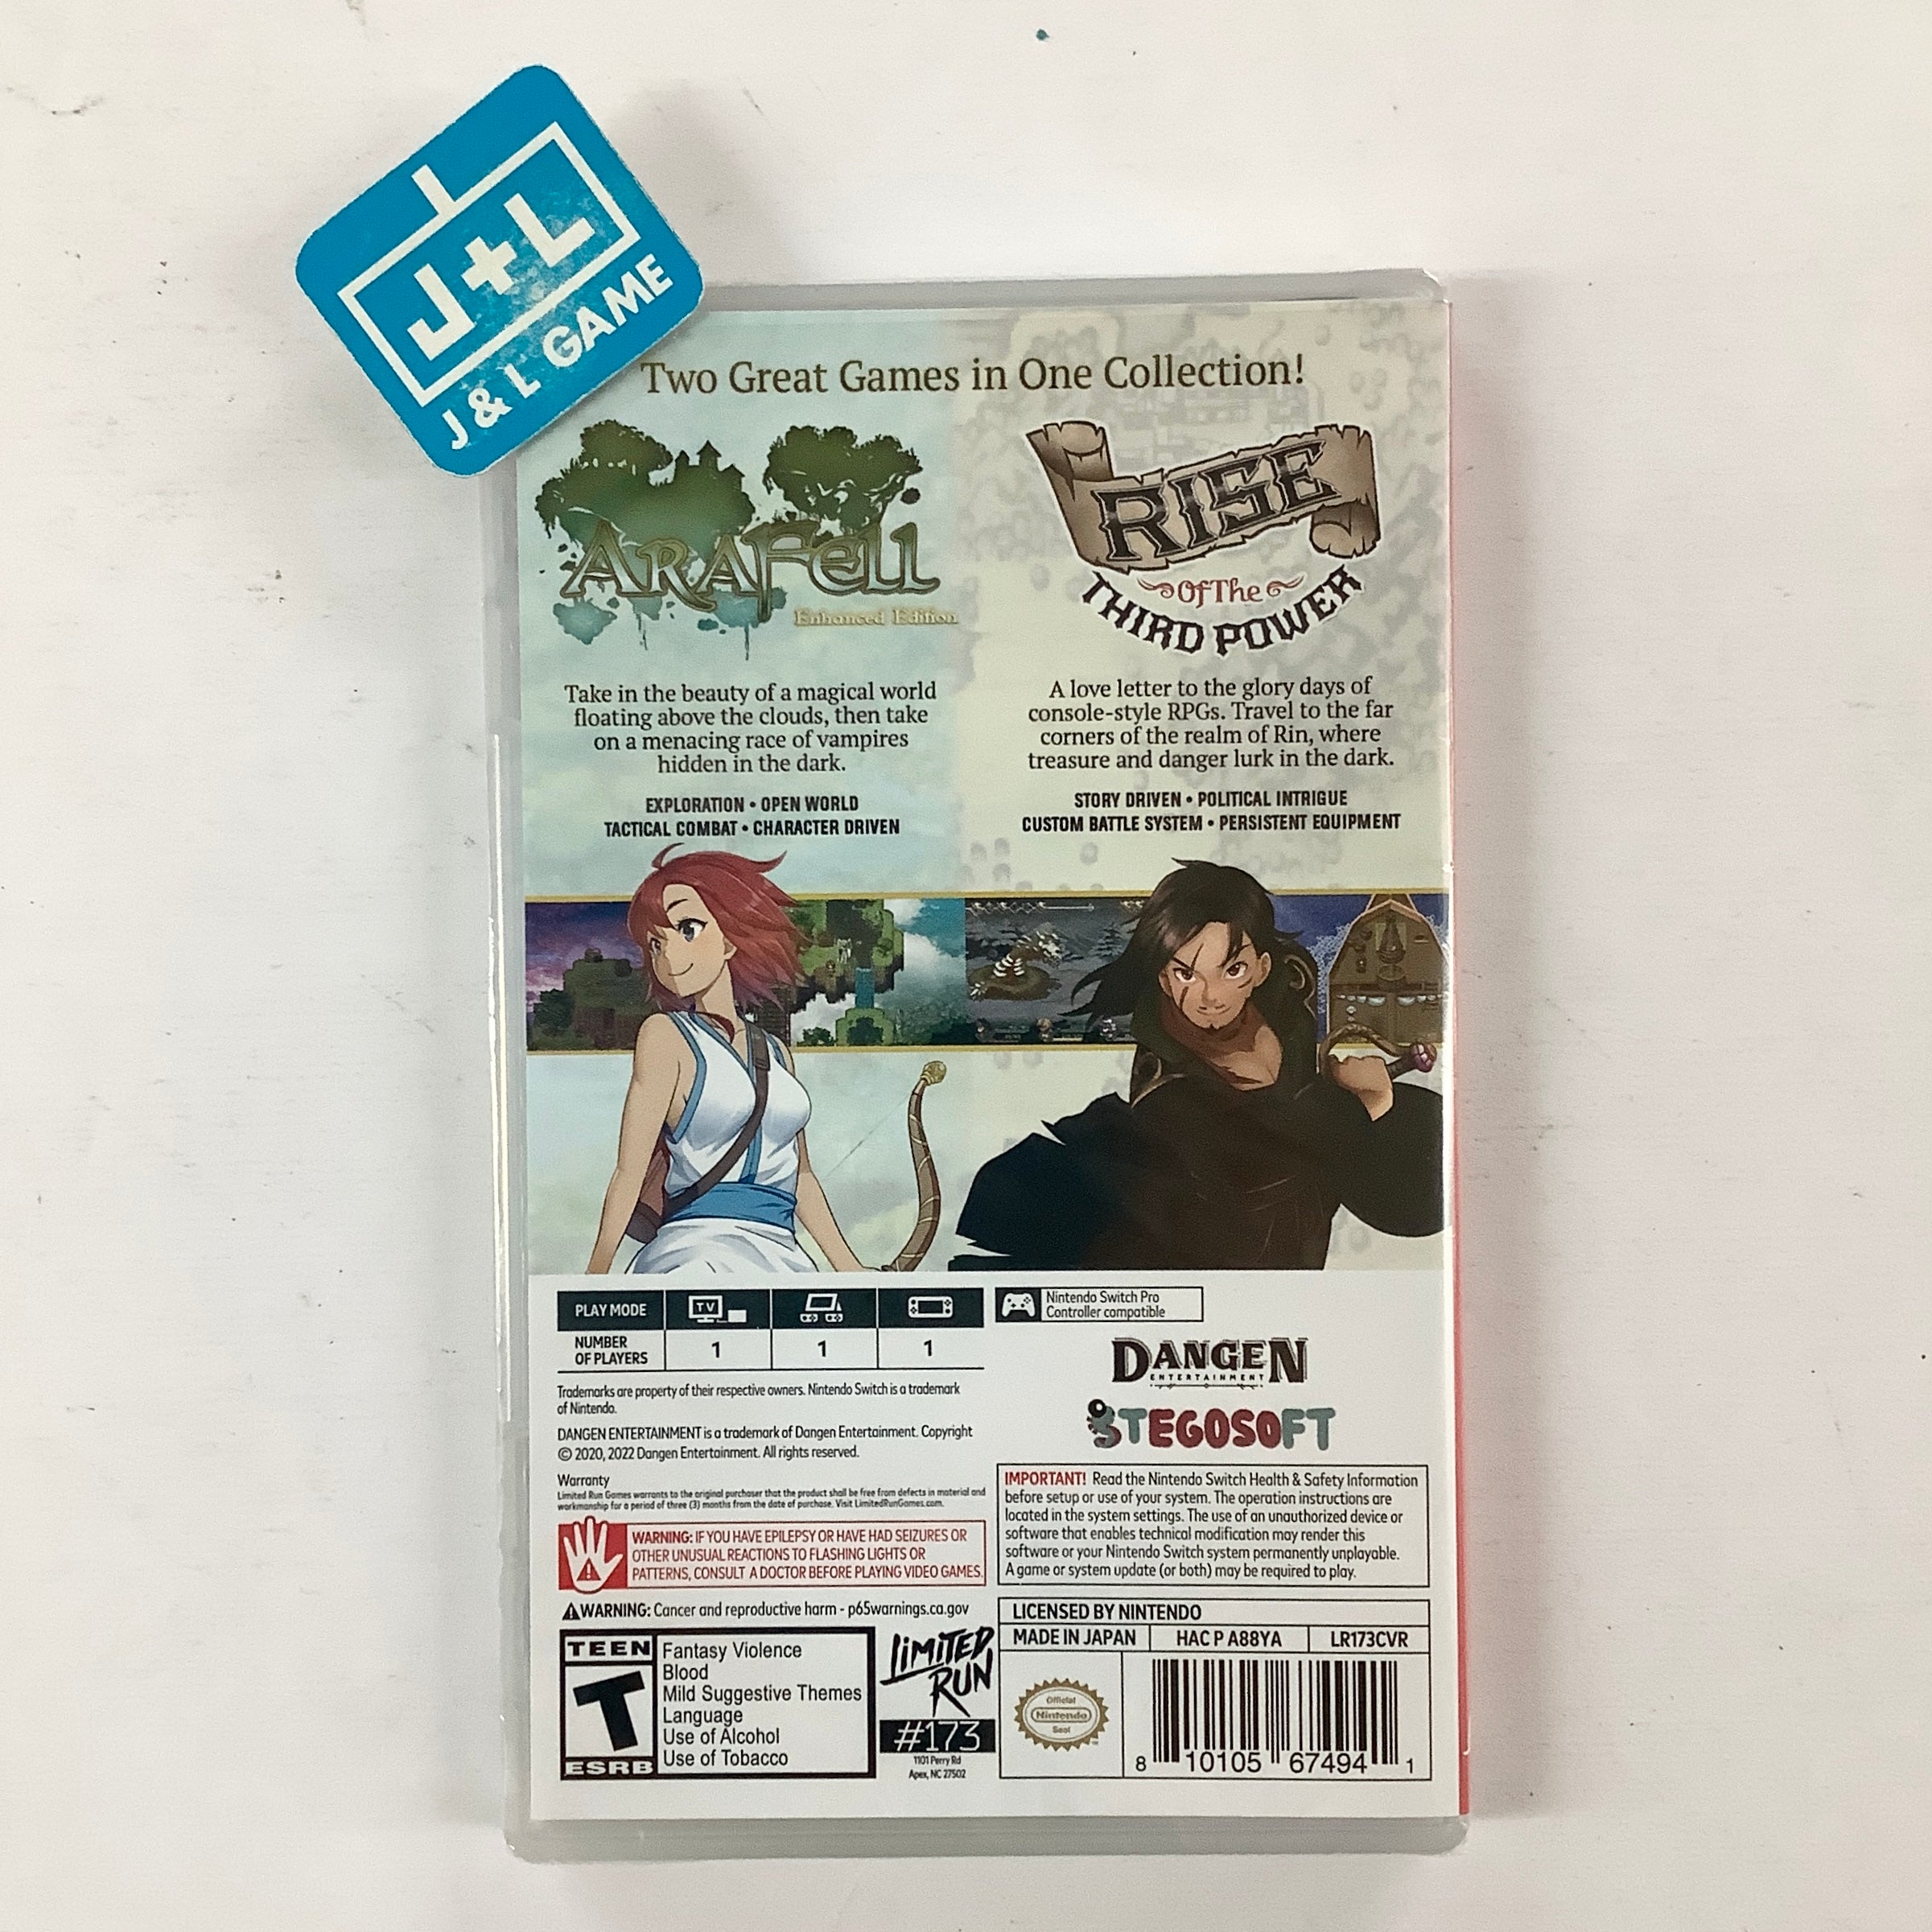 Ara Fell & Rise of the Third Power (Limited Run #173) - (NSW) Nintendo Switch Video Games Limited Run   